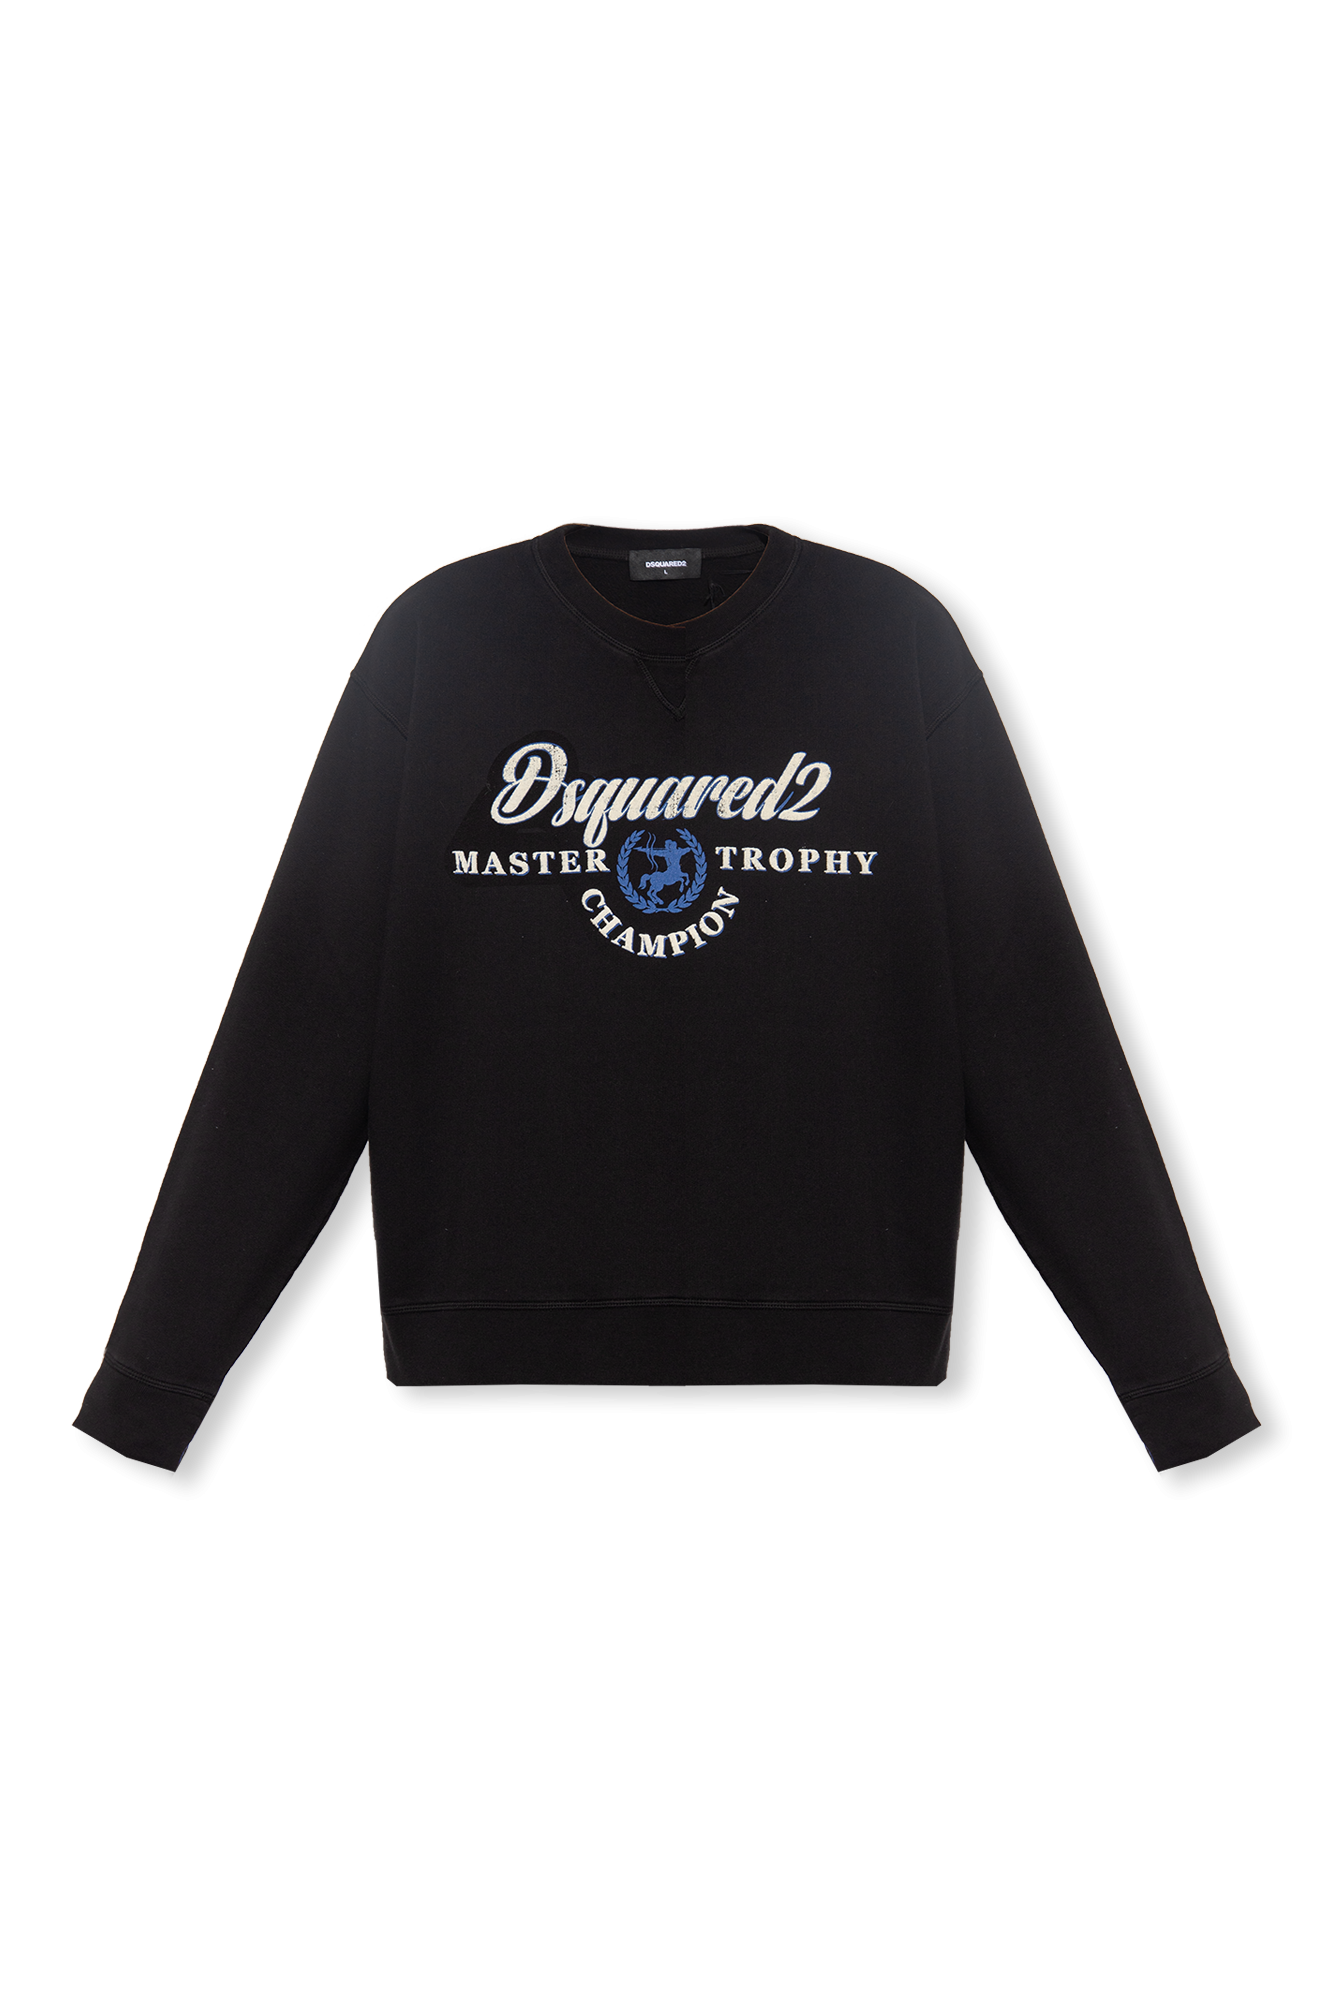 Black 'Exclusive for Vitkac' limited collection sweatshirt Dsquared2 - Vitkac  Italy